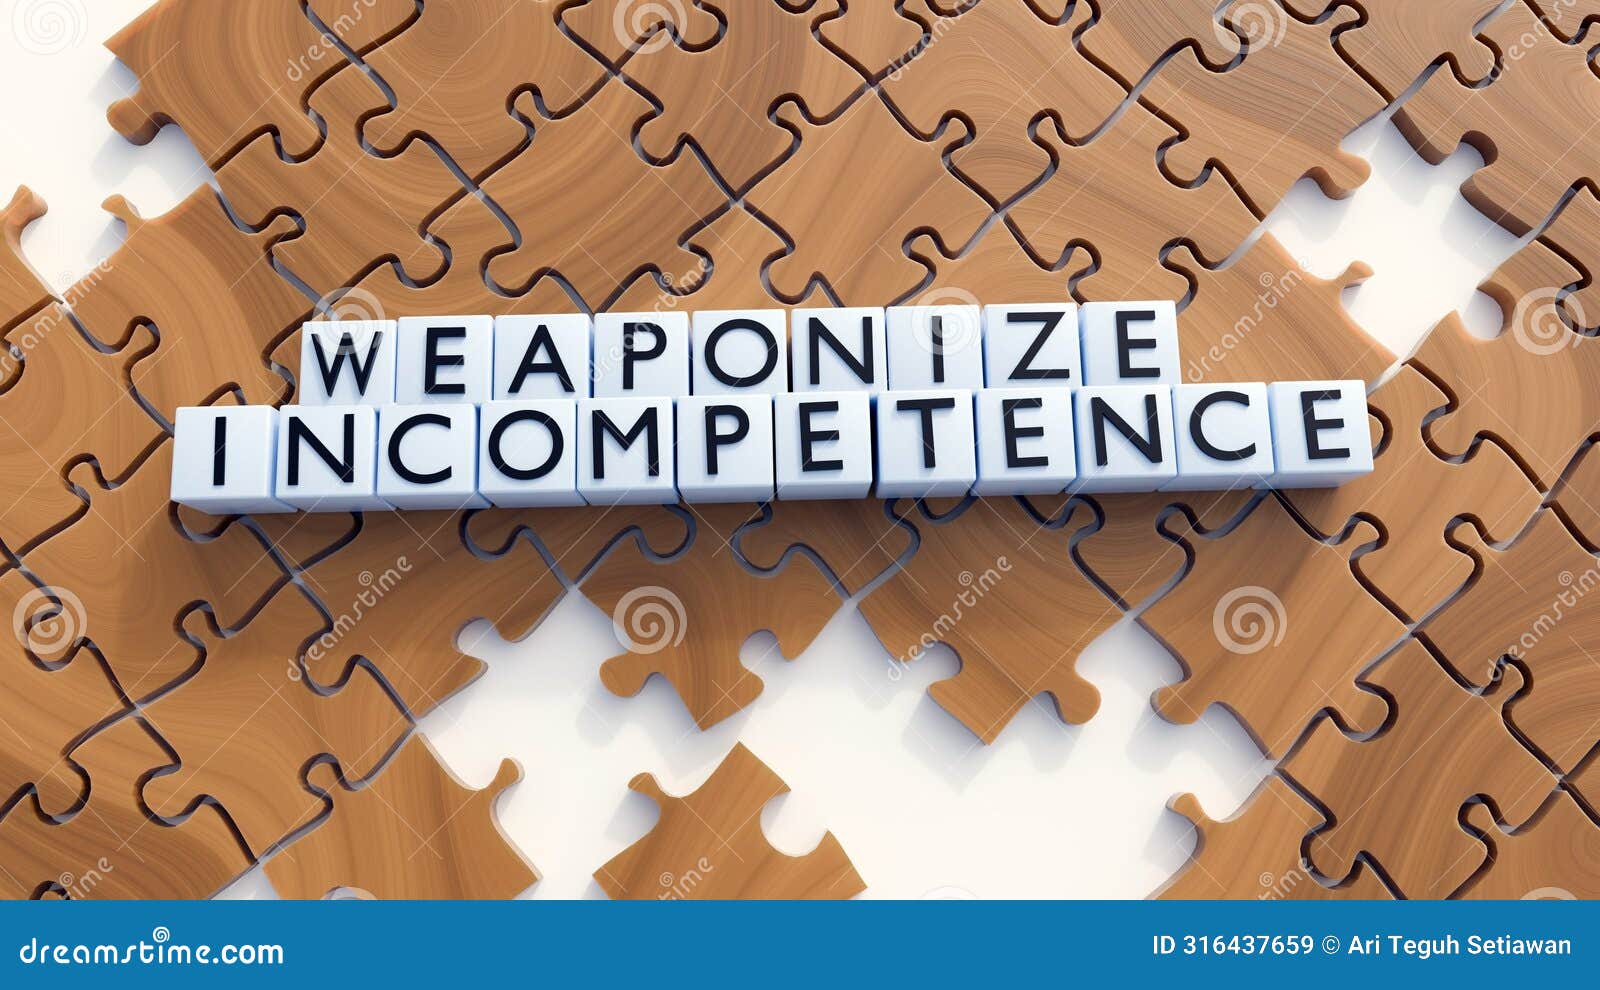 weaponized incompetence with uncomplete jigsaw pieces